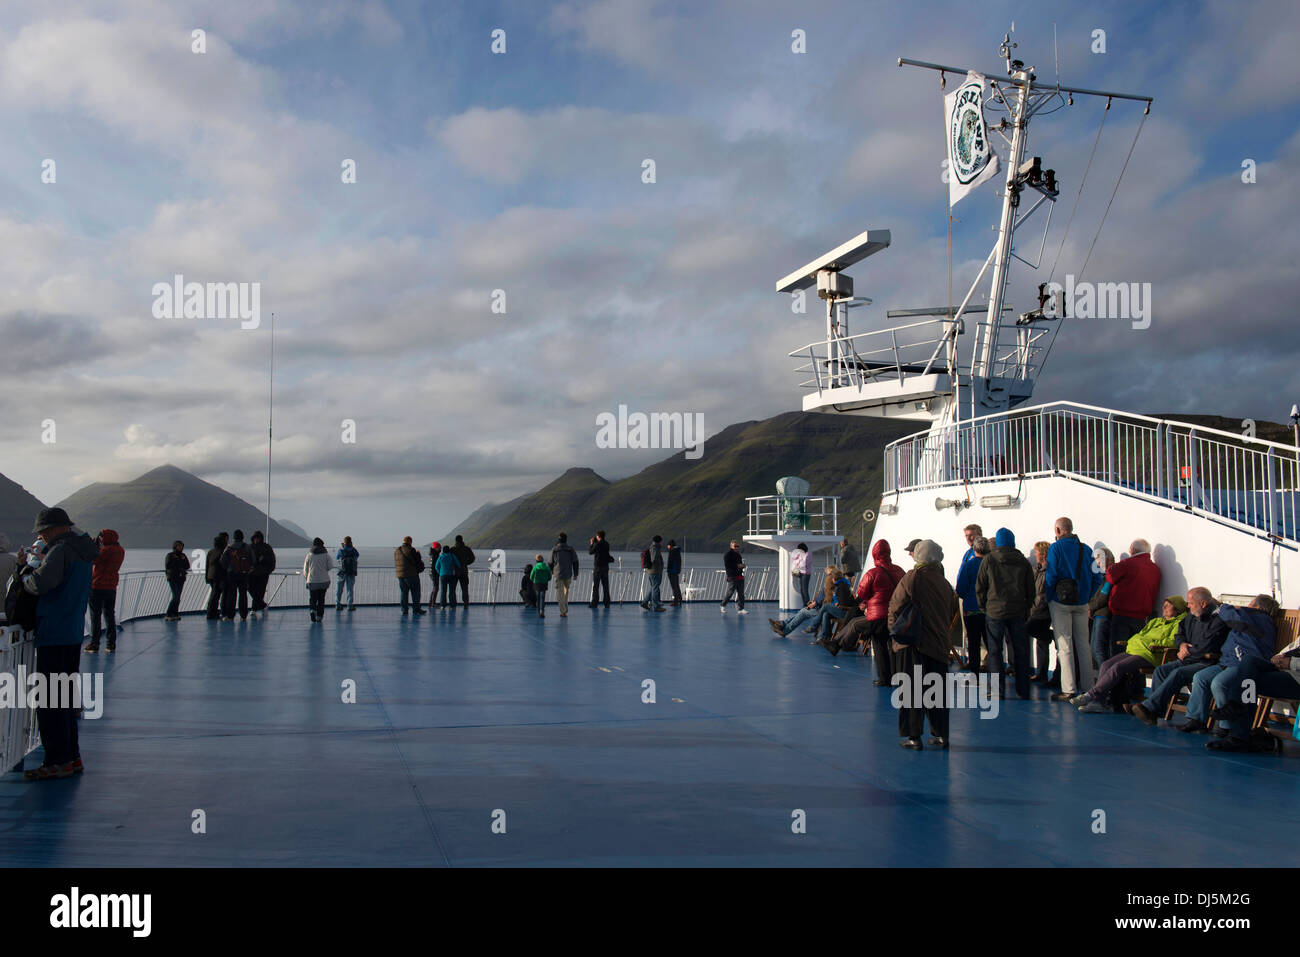 View from the ferry 'Norroena' to the Faroe Islands, boat passage between the Islands of Eysturoy and Kalsoy, Denmark, Europe Stock Photo